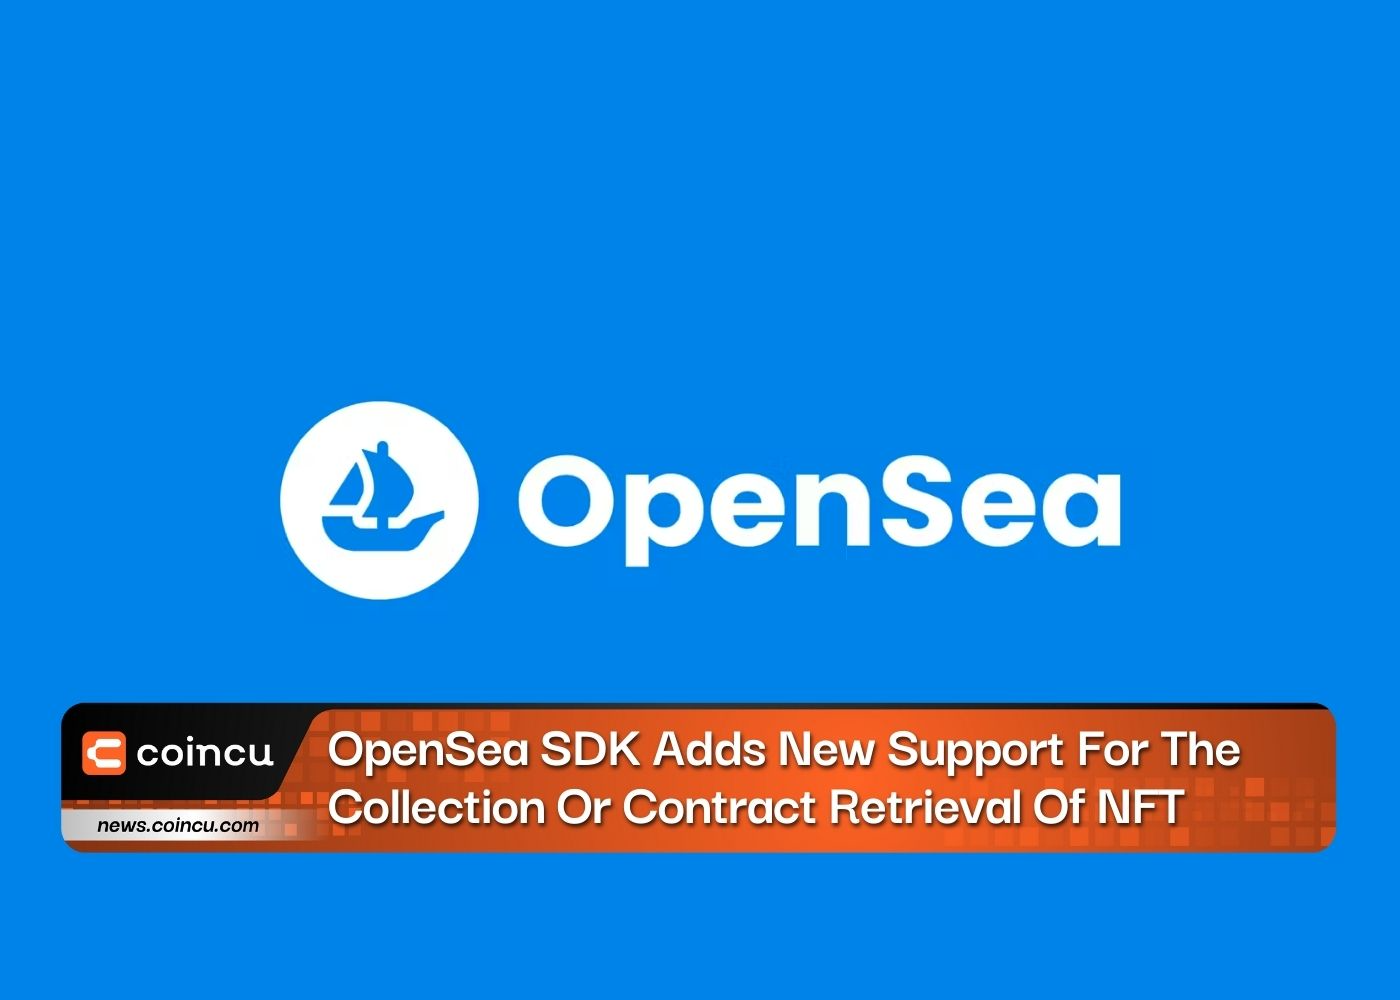 OpenSea SDK Adds New Support For The Collection Or Contract Retrieval Of NFT